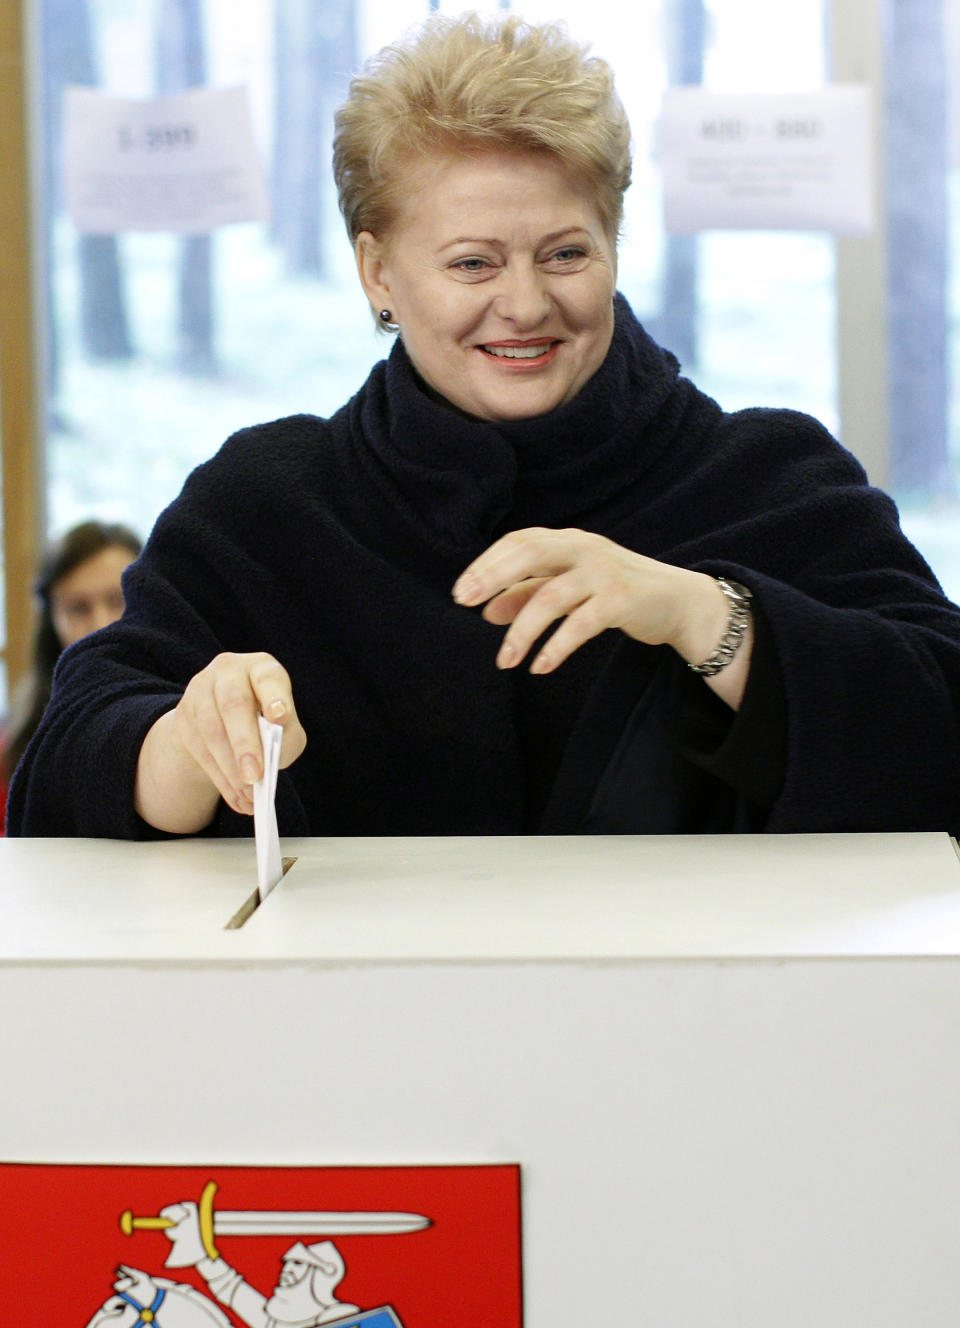 Lithuania's President Dalia Grybauskaite casts her ballot at a polling station in Vilnius, Lithuania, Sunday, Oct. 14, 2012. Lithuanians are expected to deal a double-blow to the incumbent conservative government in national elections Sunday by handing a victory to opposition leftists and populists and saying 'no' to a new nuclear power plant that supporters claim would boost the country's energy independence. (AP Photo/Mindaugas Kulbis)